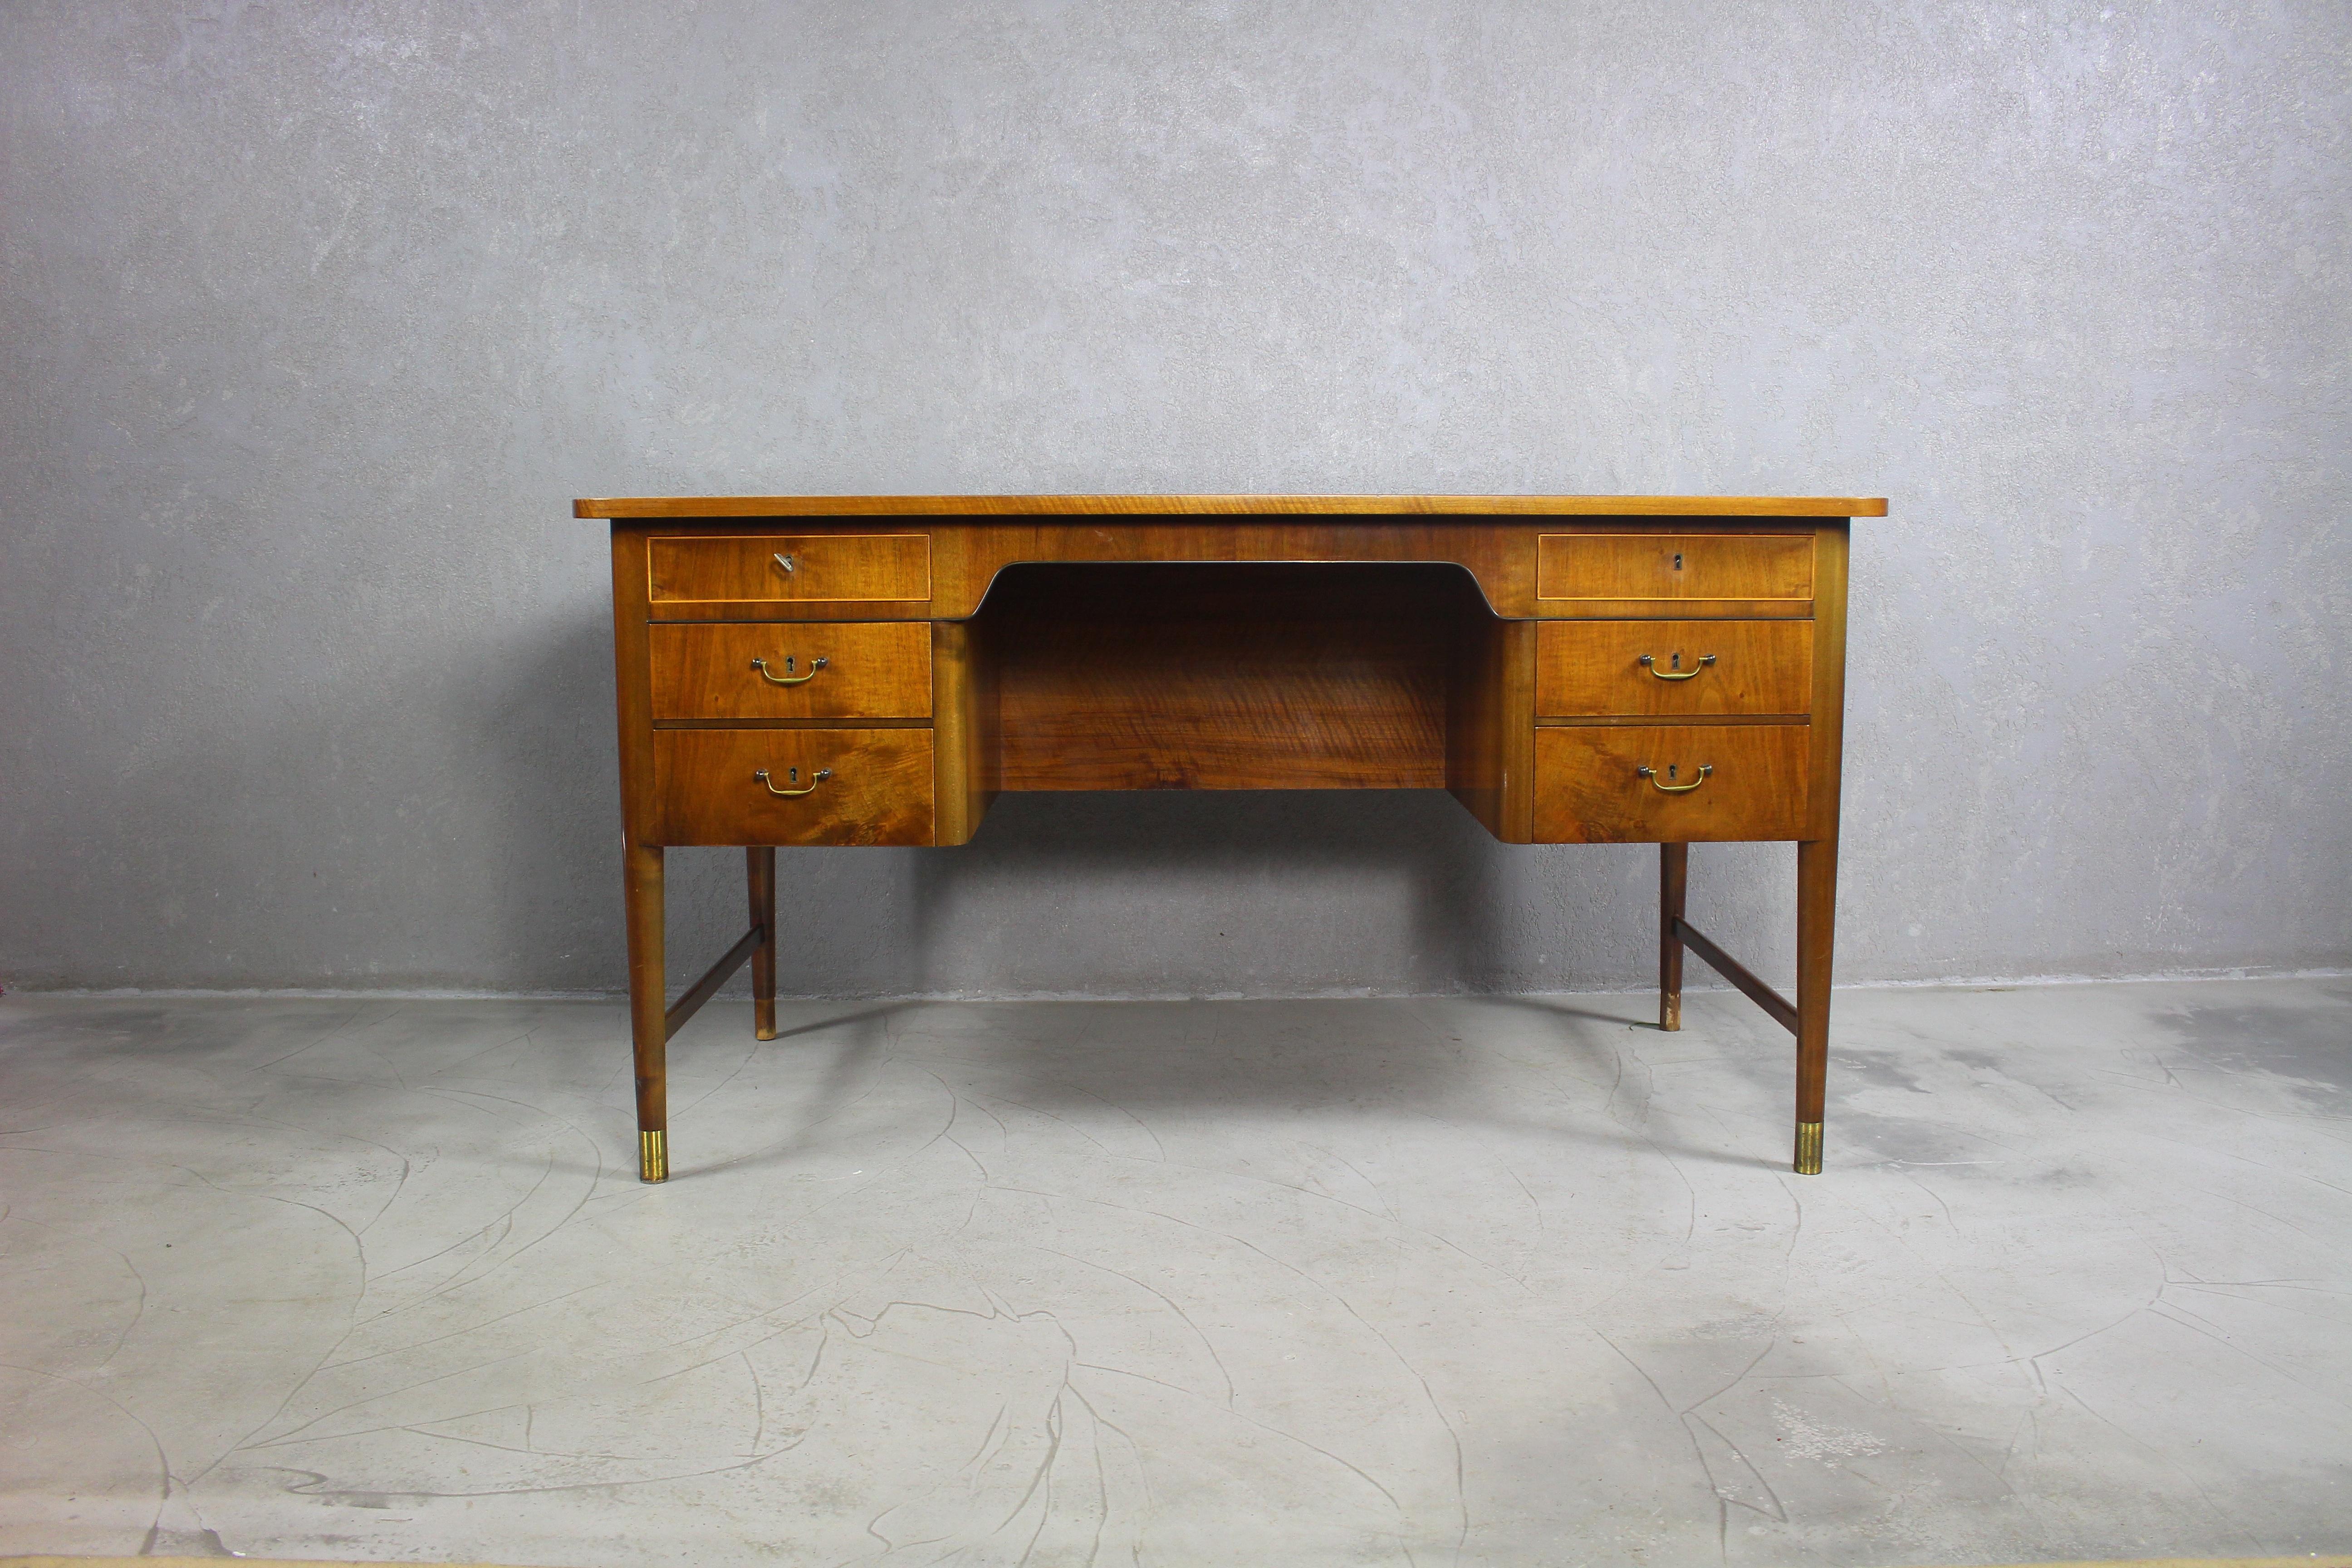 Elegant varnished desk with brass foots and hadles.
The sides of the desk are oval.
Features six drawers. Four drawers decorative brass handles. 

